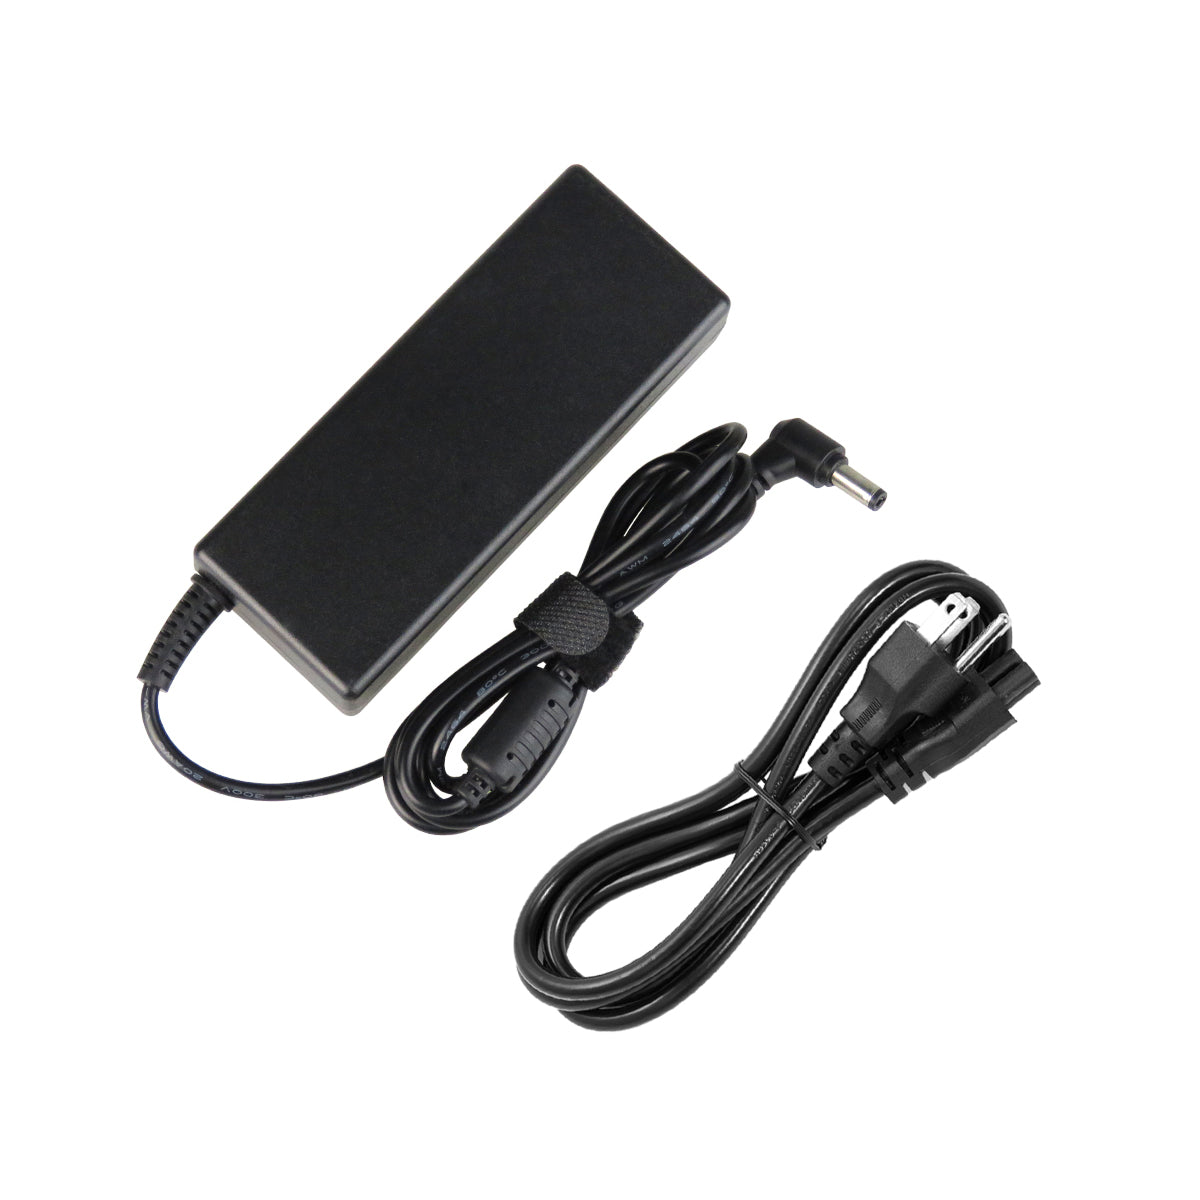 AC Adapter Charger for ASUS X55c Notebook.